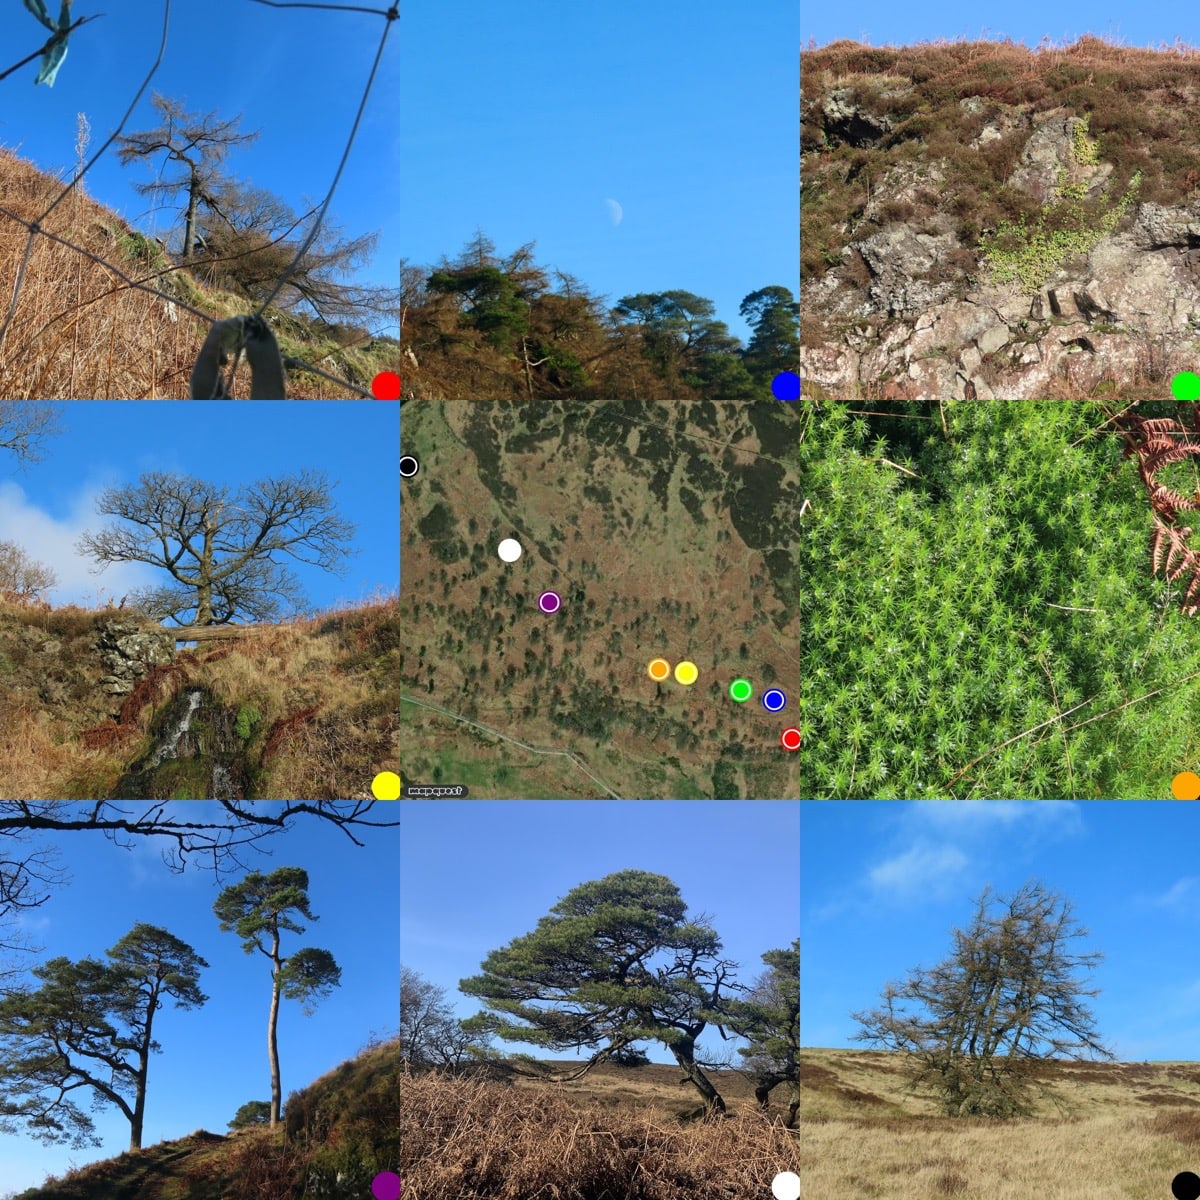 grid of photos round a hybrid map of where they were taken. Trees, rocks and moss.